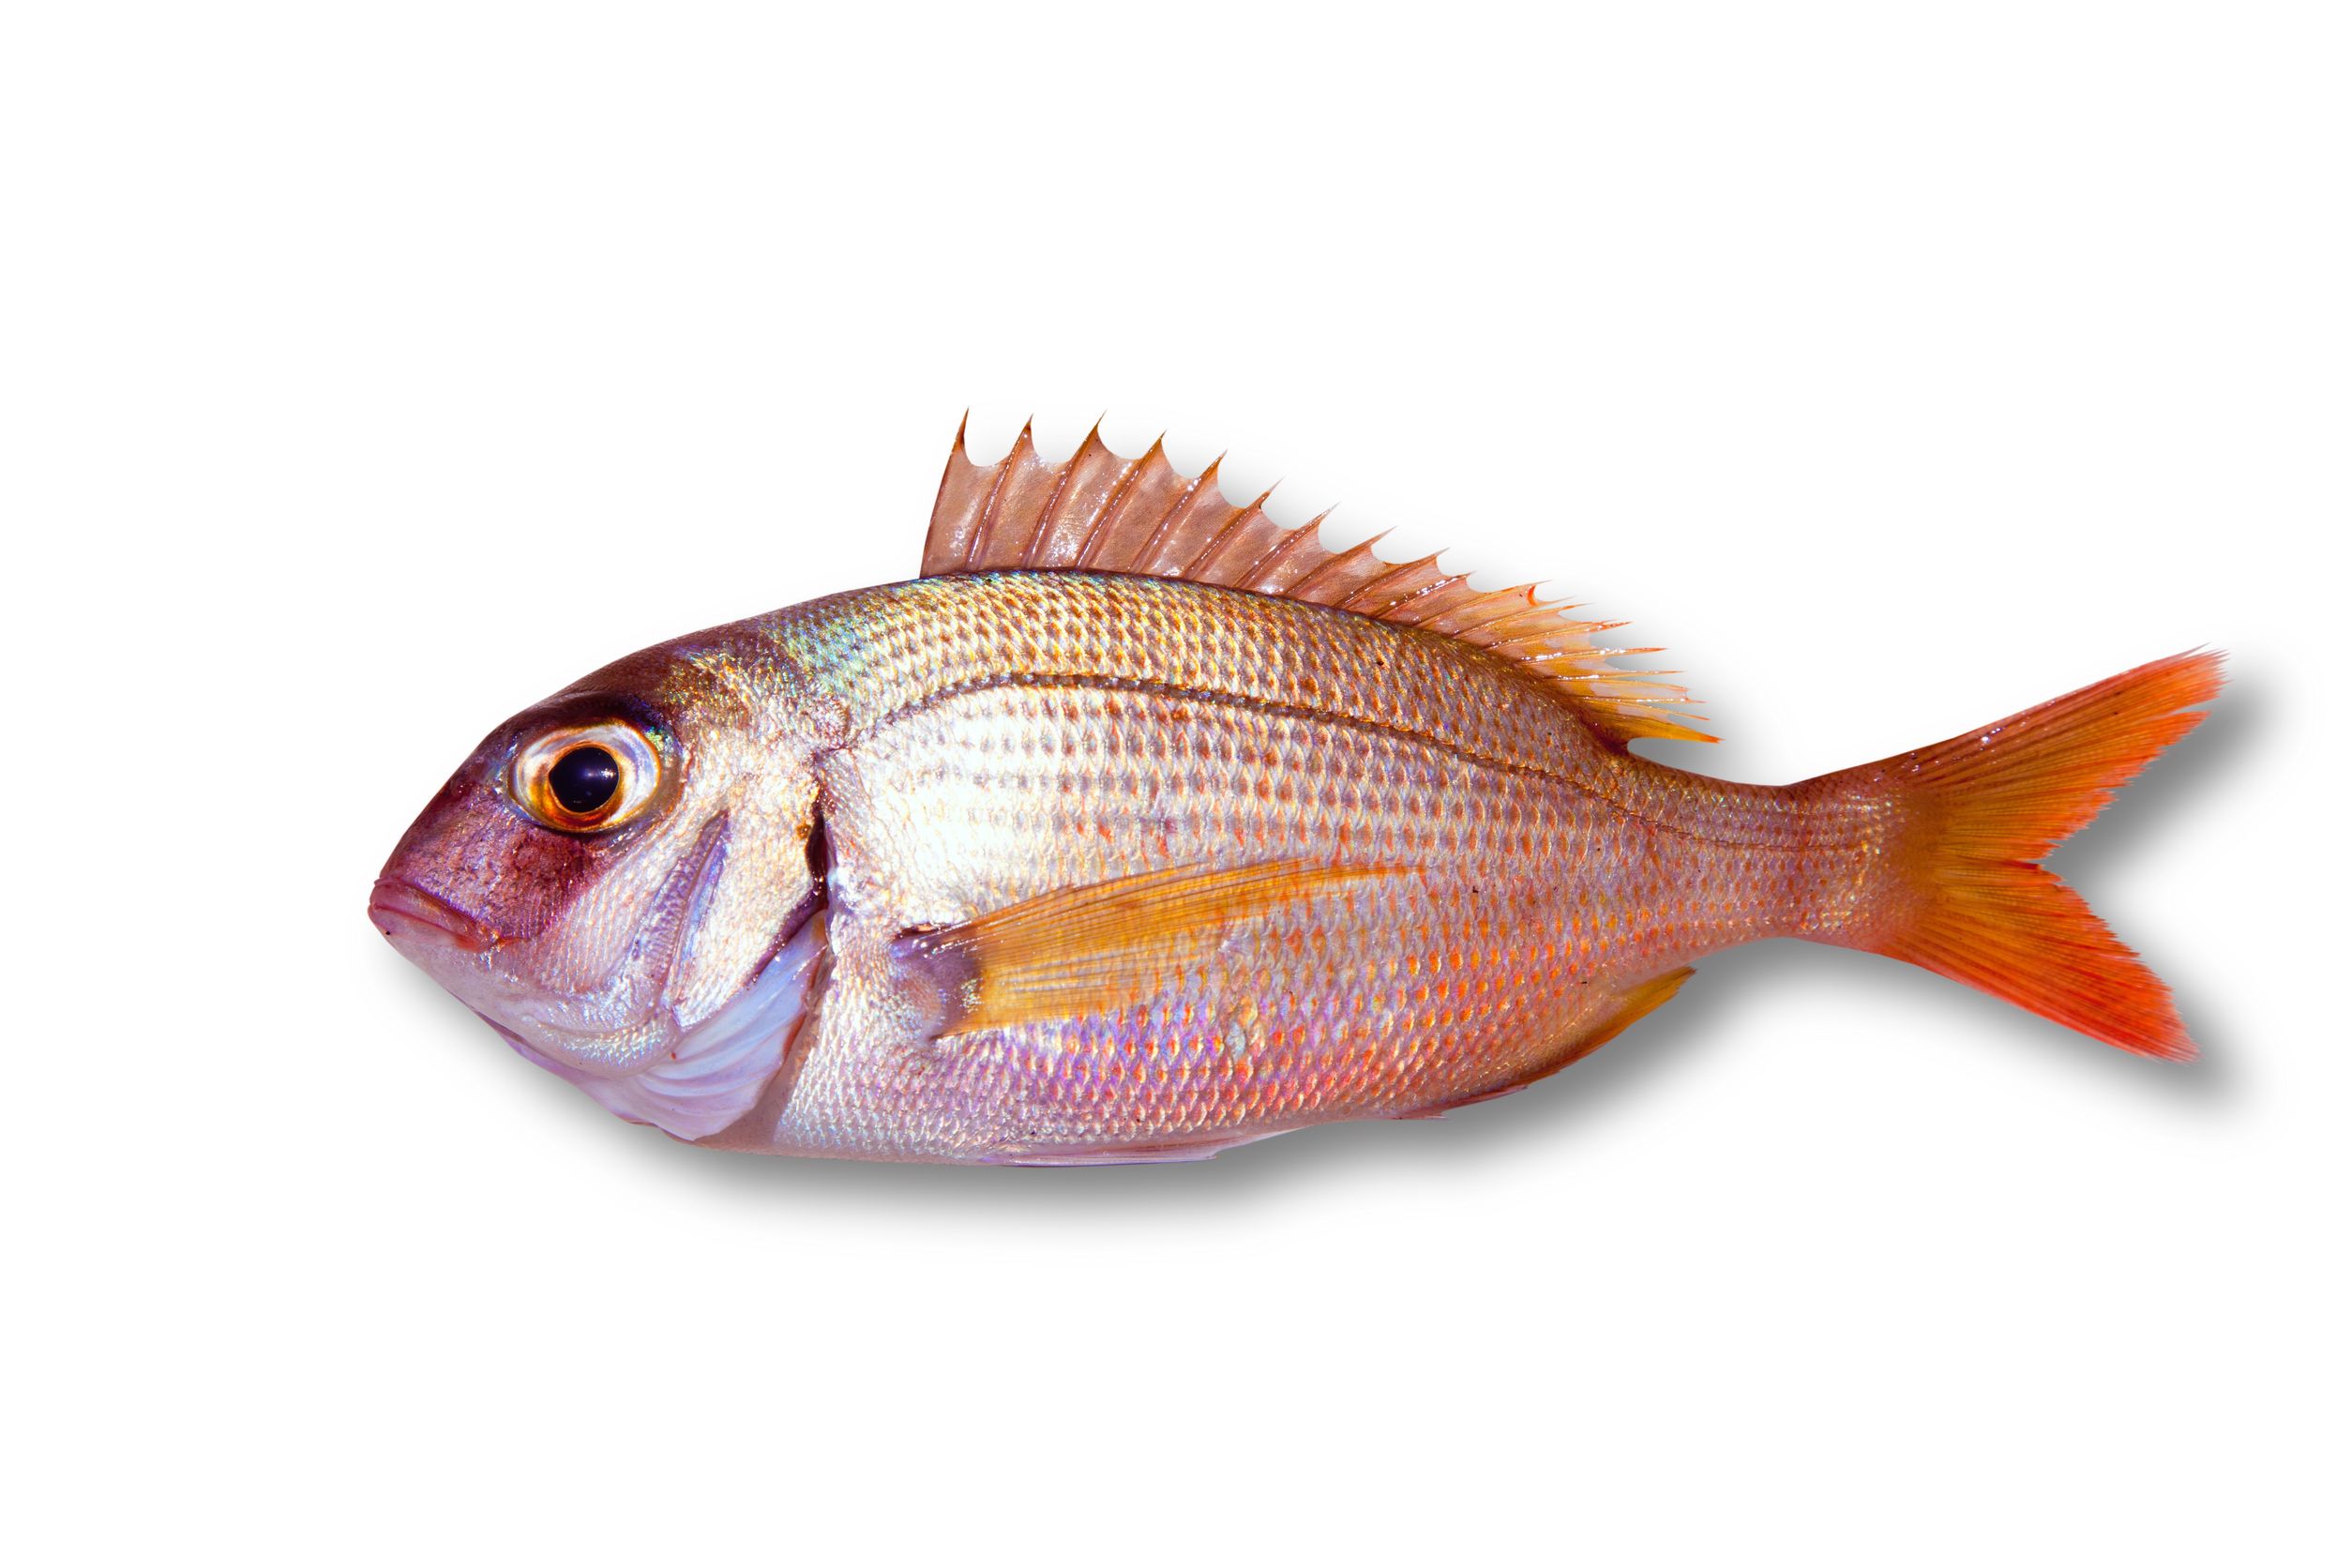 Buy Fresh Tai Snapper Whole Online - Exquisite Pink Sea Bream